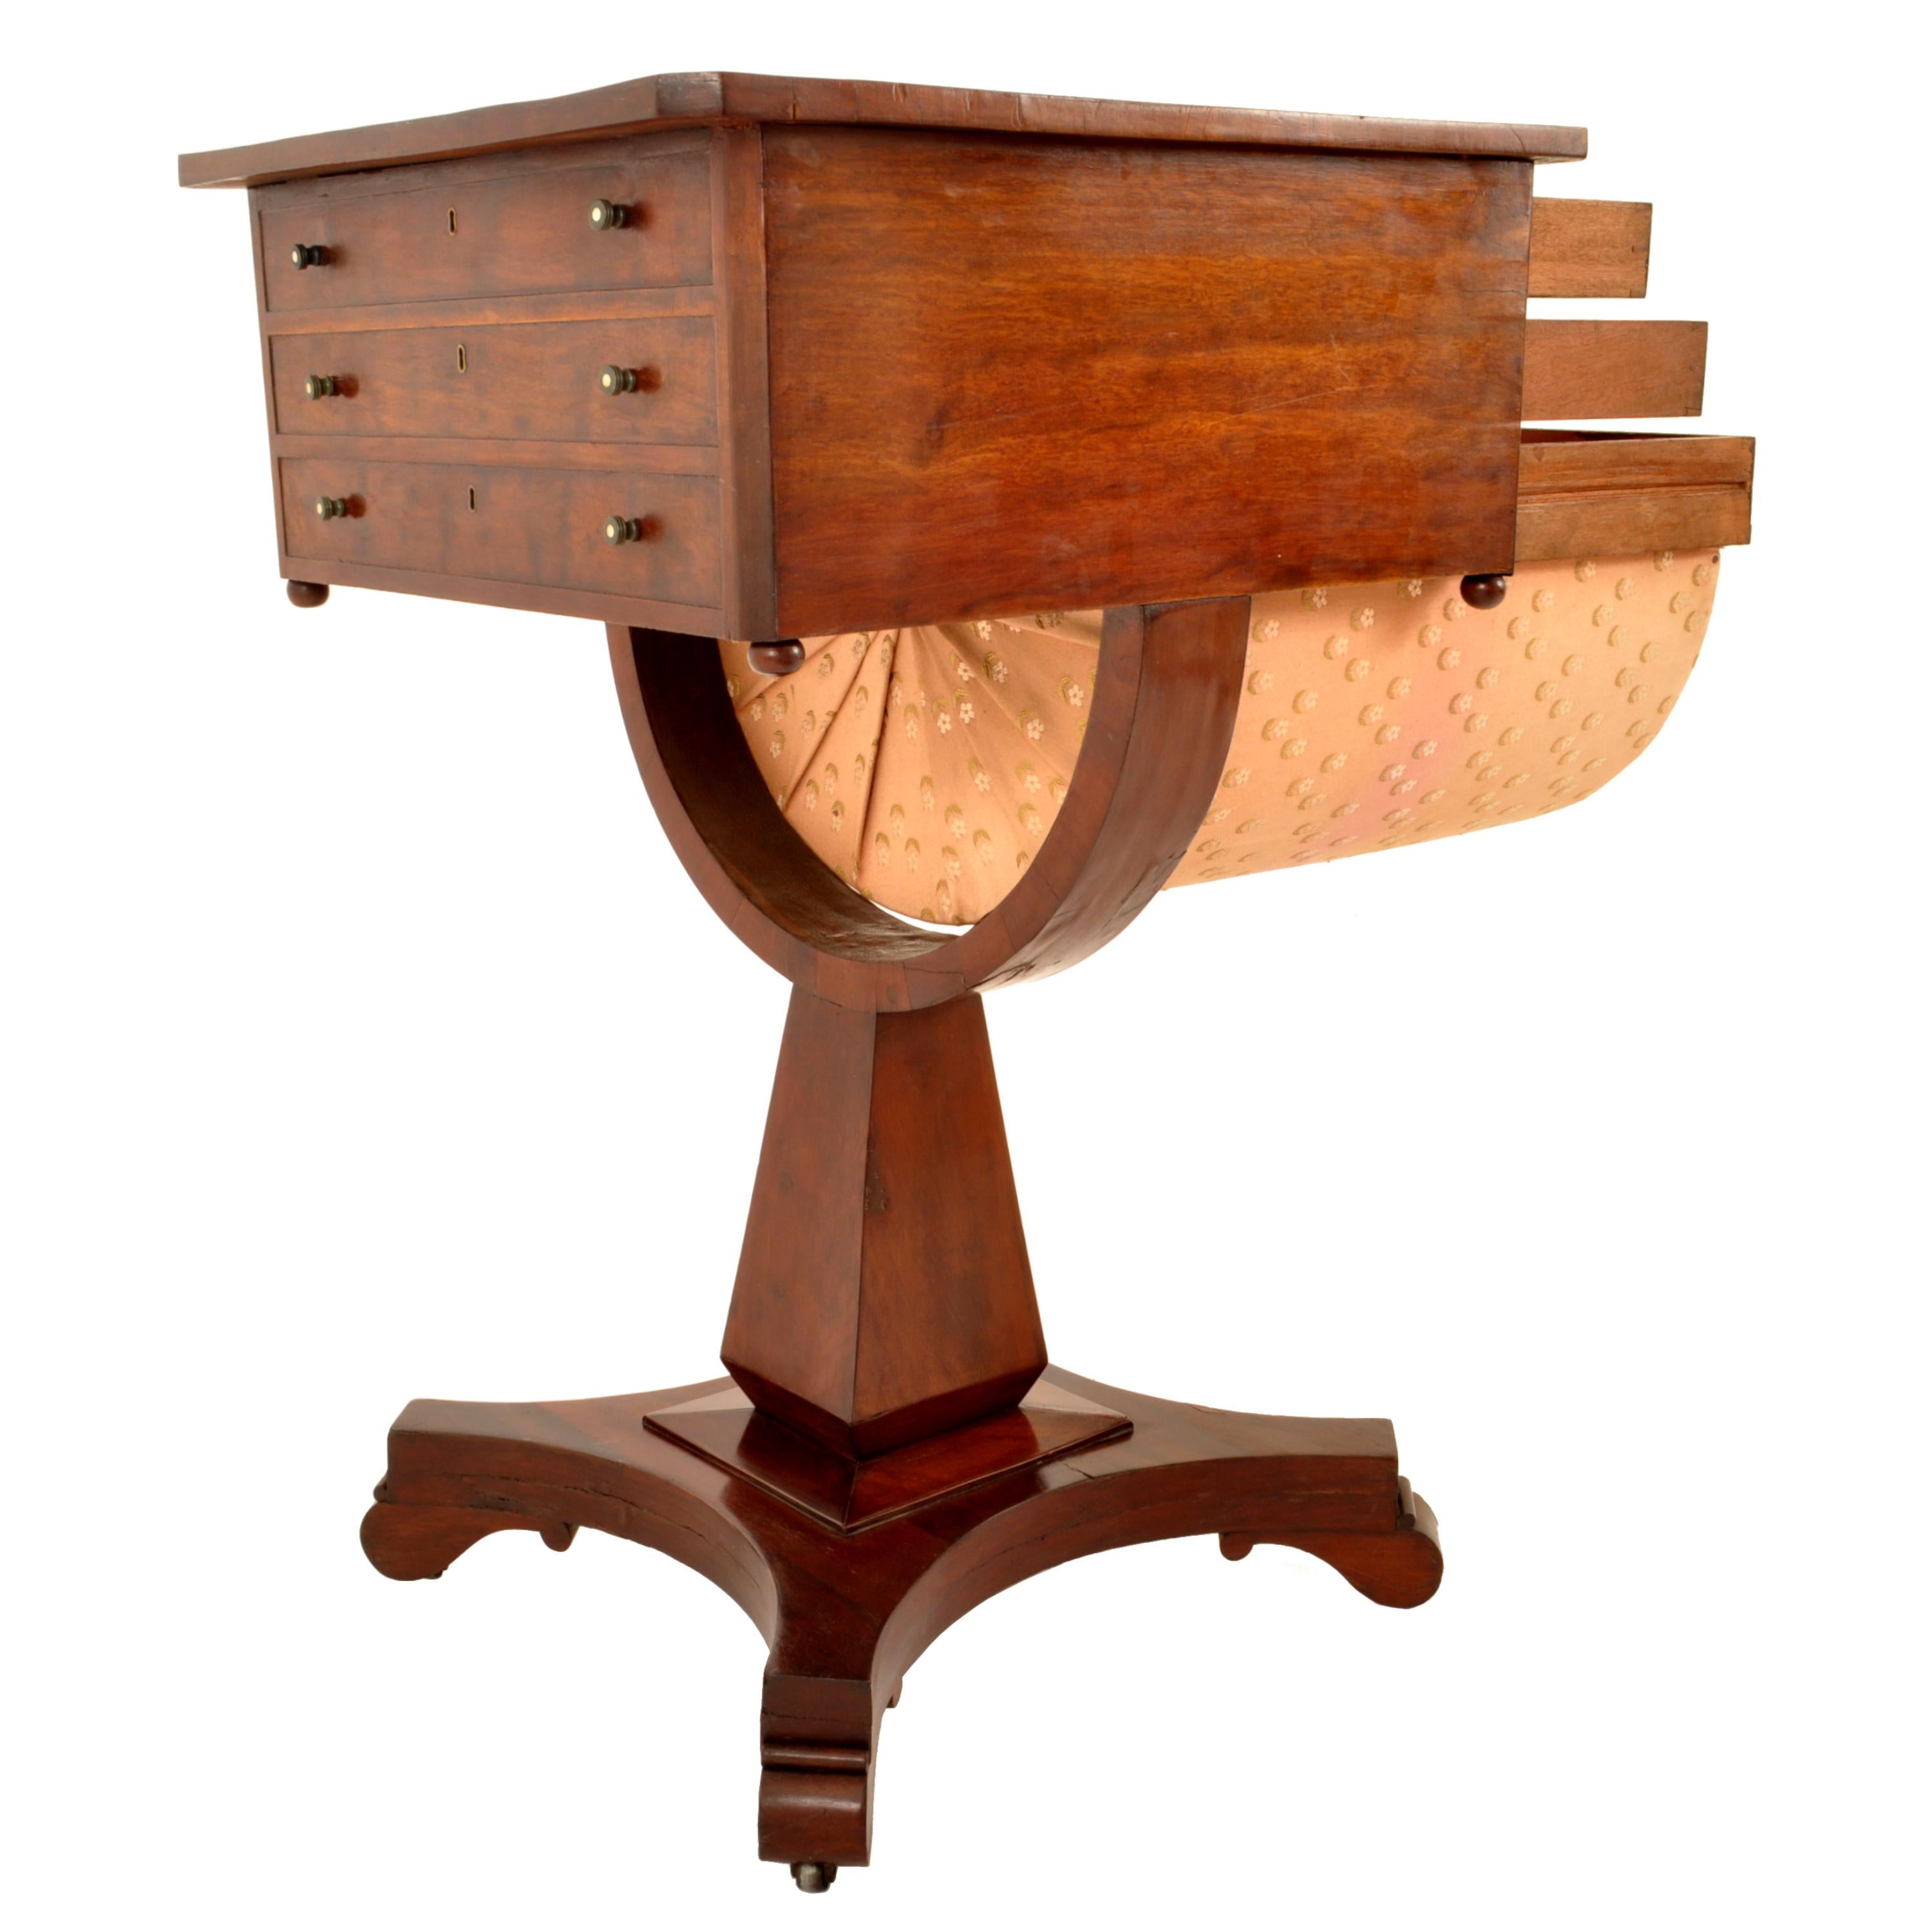 Antique American Empire Mahogany Pedestal Sewing Work Table New York Circa 1840 For Sale 5